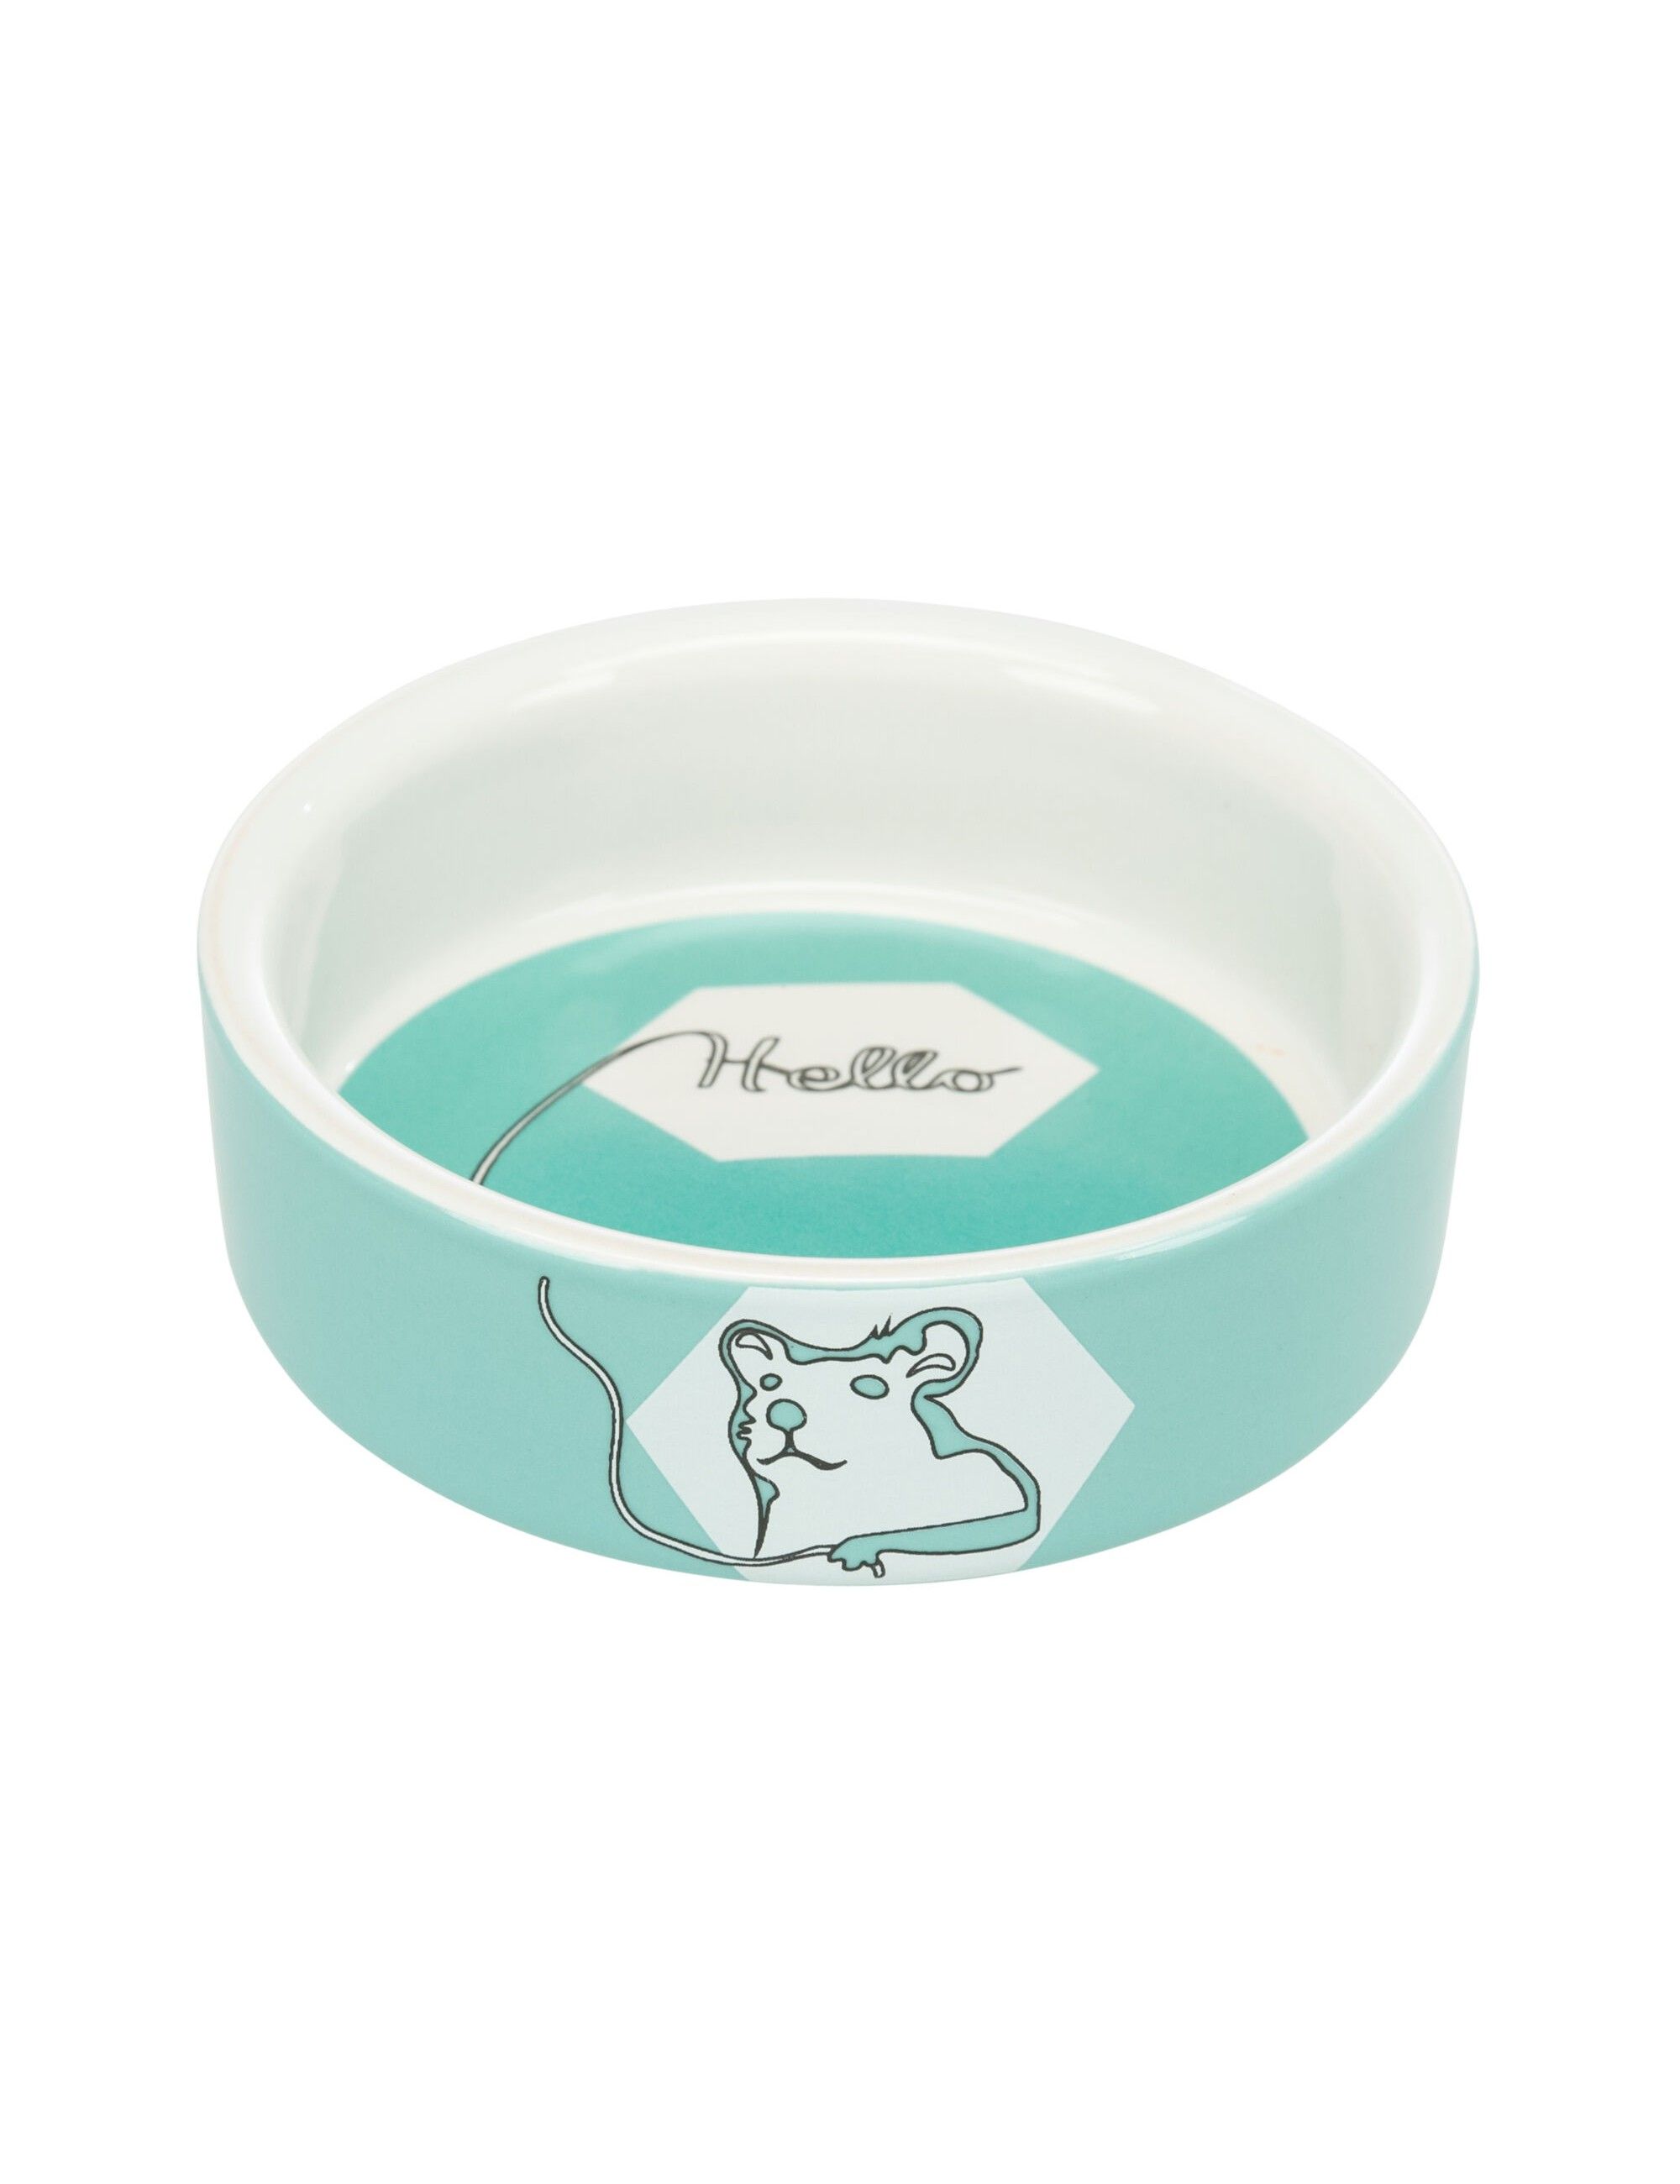 TRIXIE - Ceramic Bowl for Small Rodents - Blue